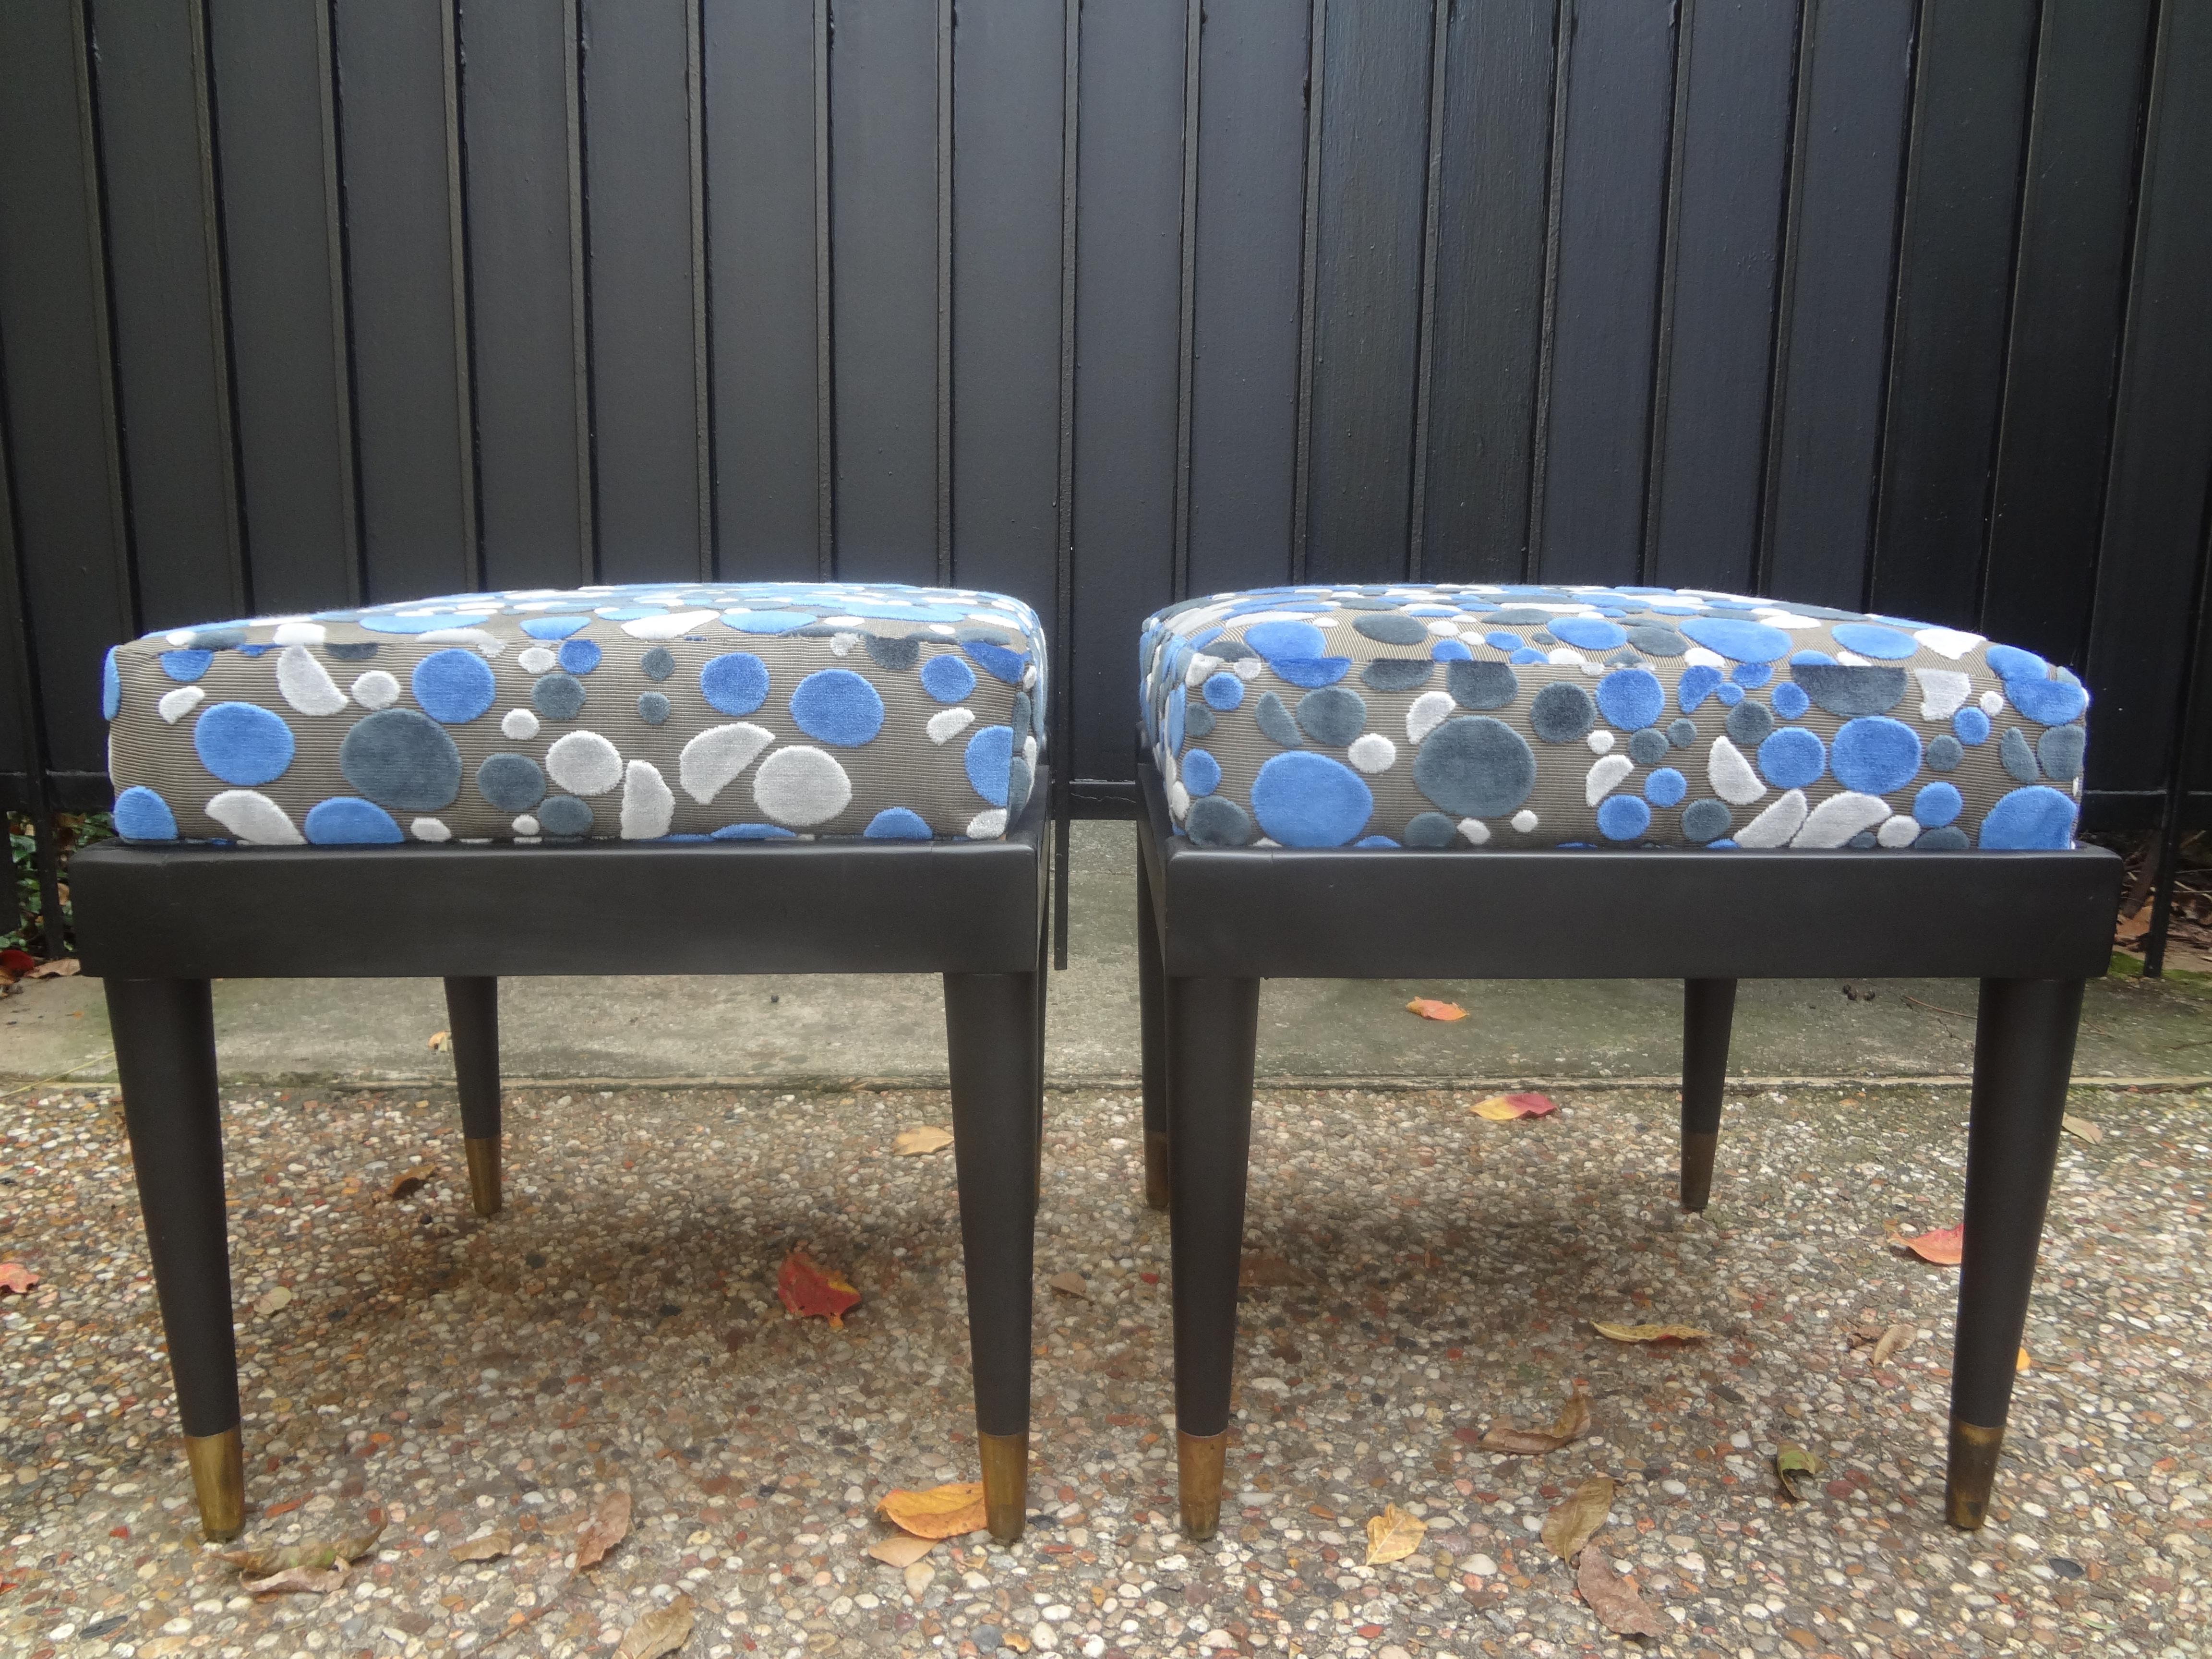 Pair of French ottomans after Jansen. These stunning French Maison Jansen style ottomans, benches or stools have a matte ebonized finish, tapered legs with brass sabots. These French Mid-Century Modern benches have been newly upholstered in a